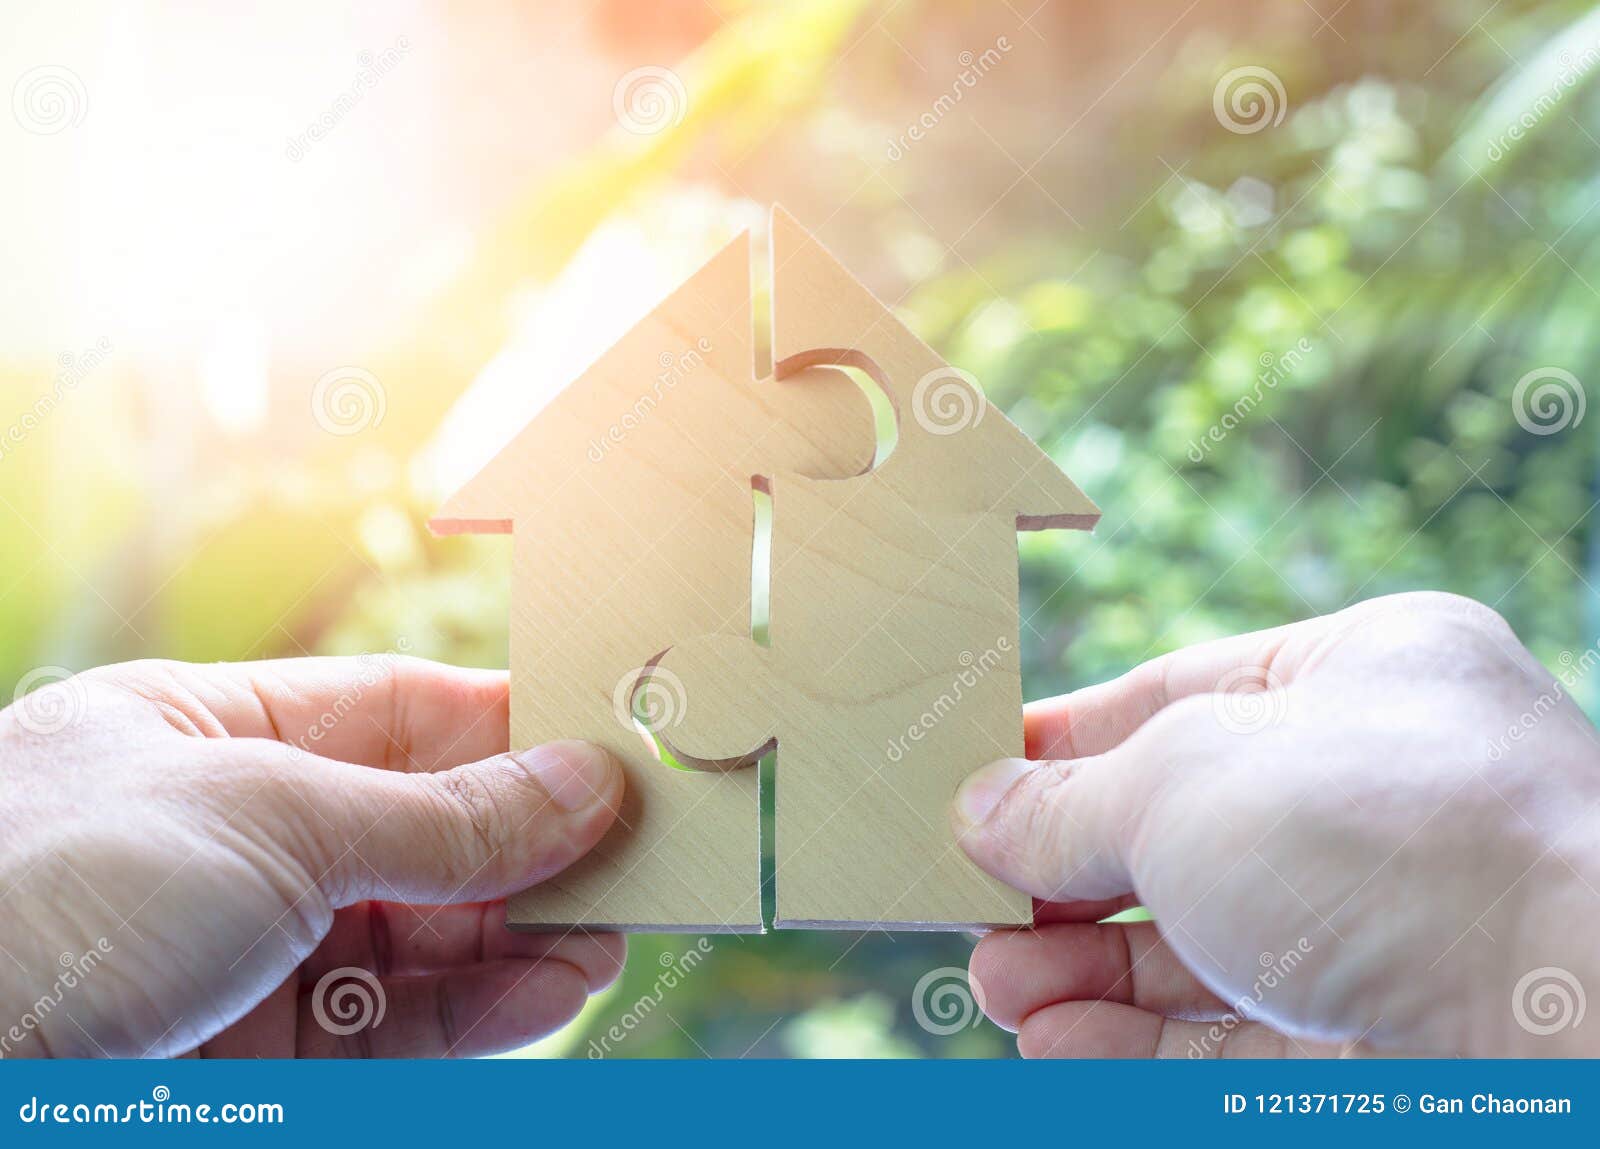 wooden puzzle wait to fulfill home  for build dream home or happy life concept for property, mortgage and real estate investm